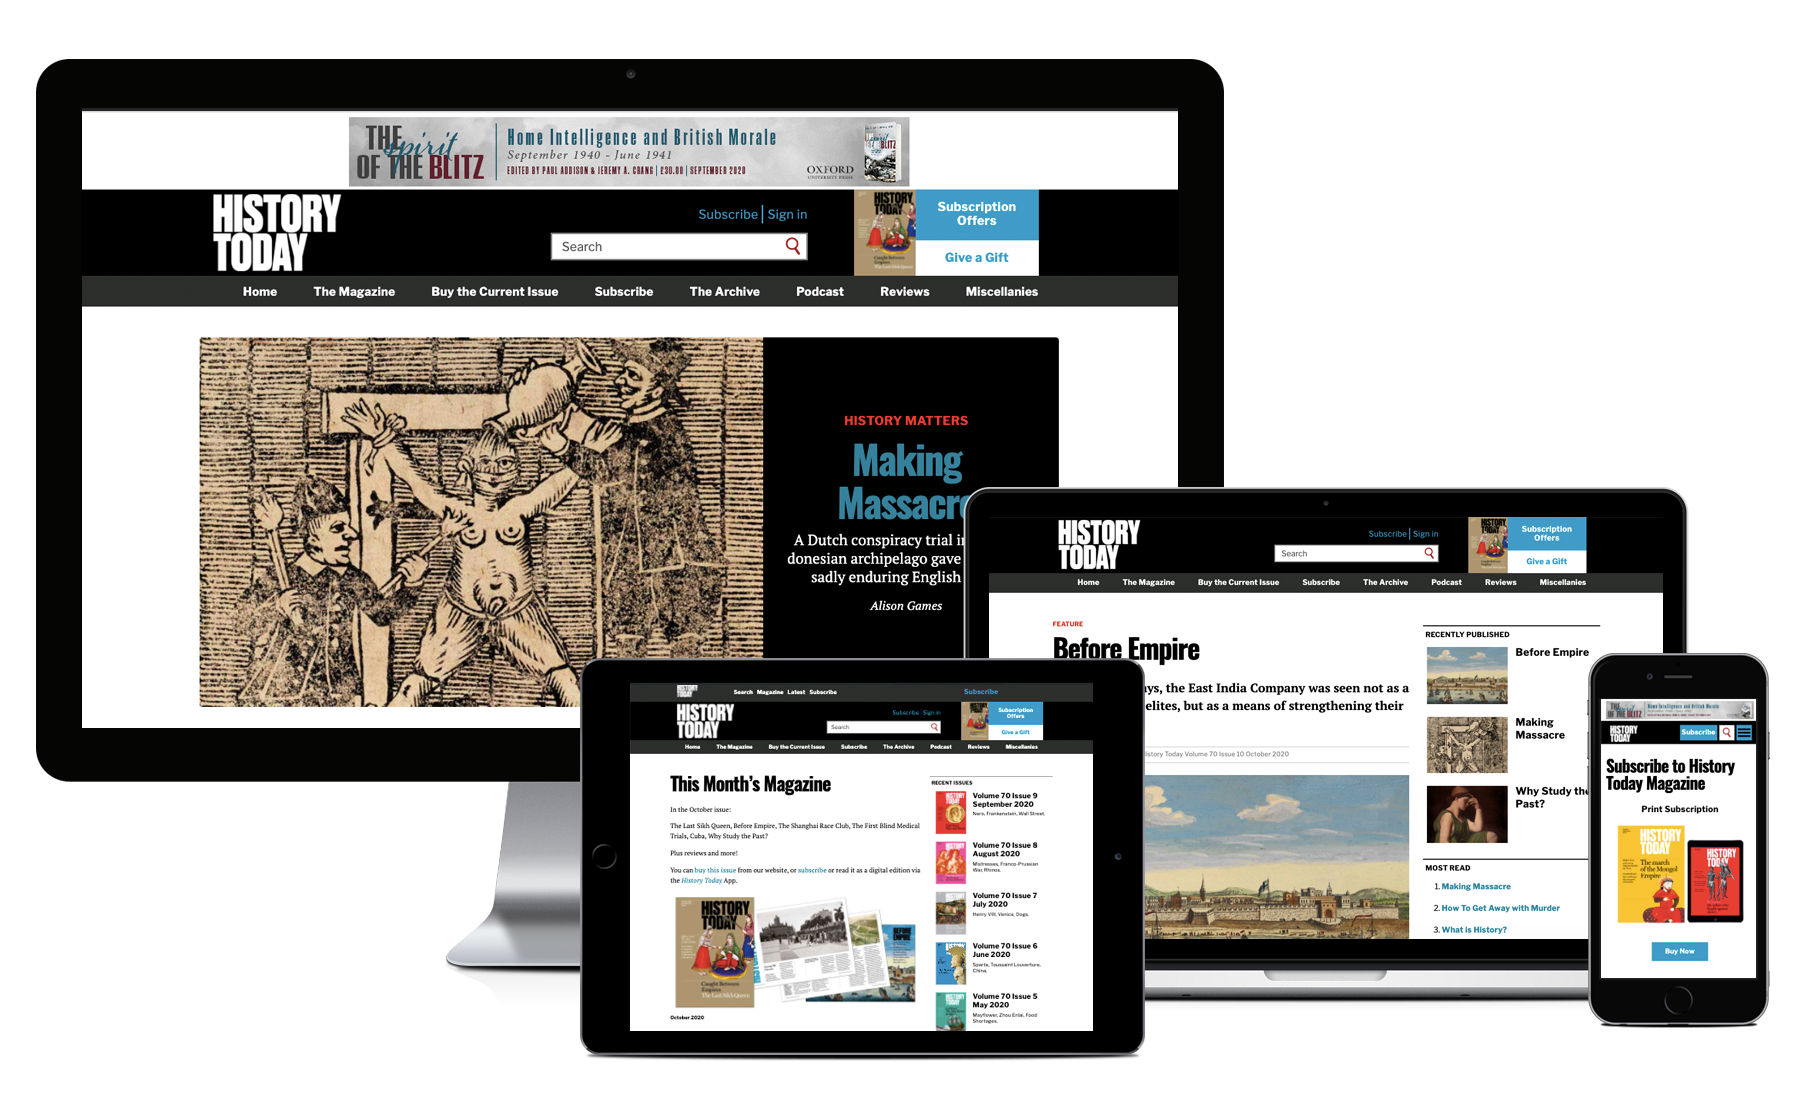 Desktop, Macbook, tablet and iPhone showing pages from History Today’s Website